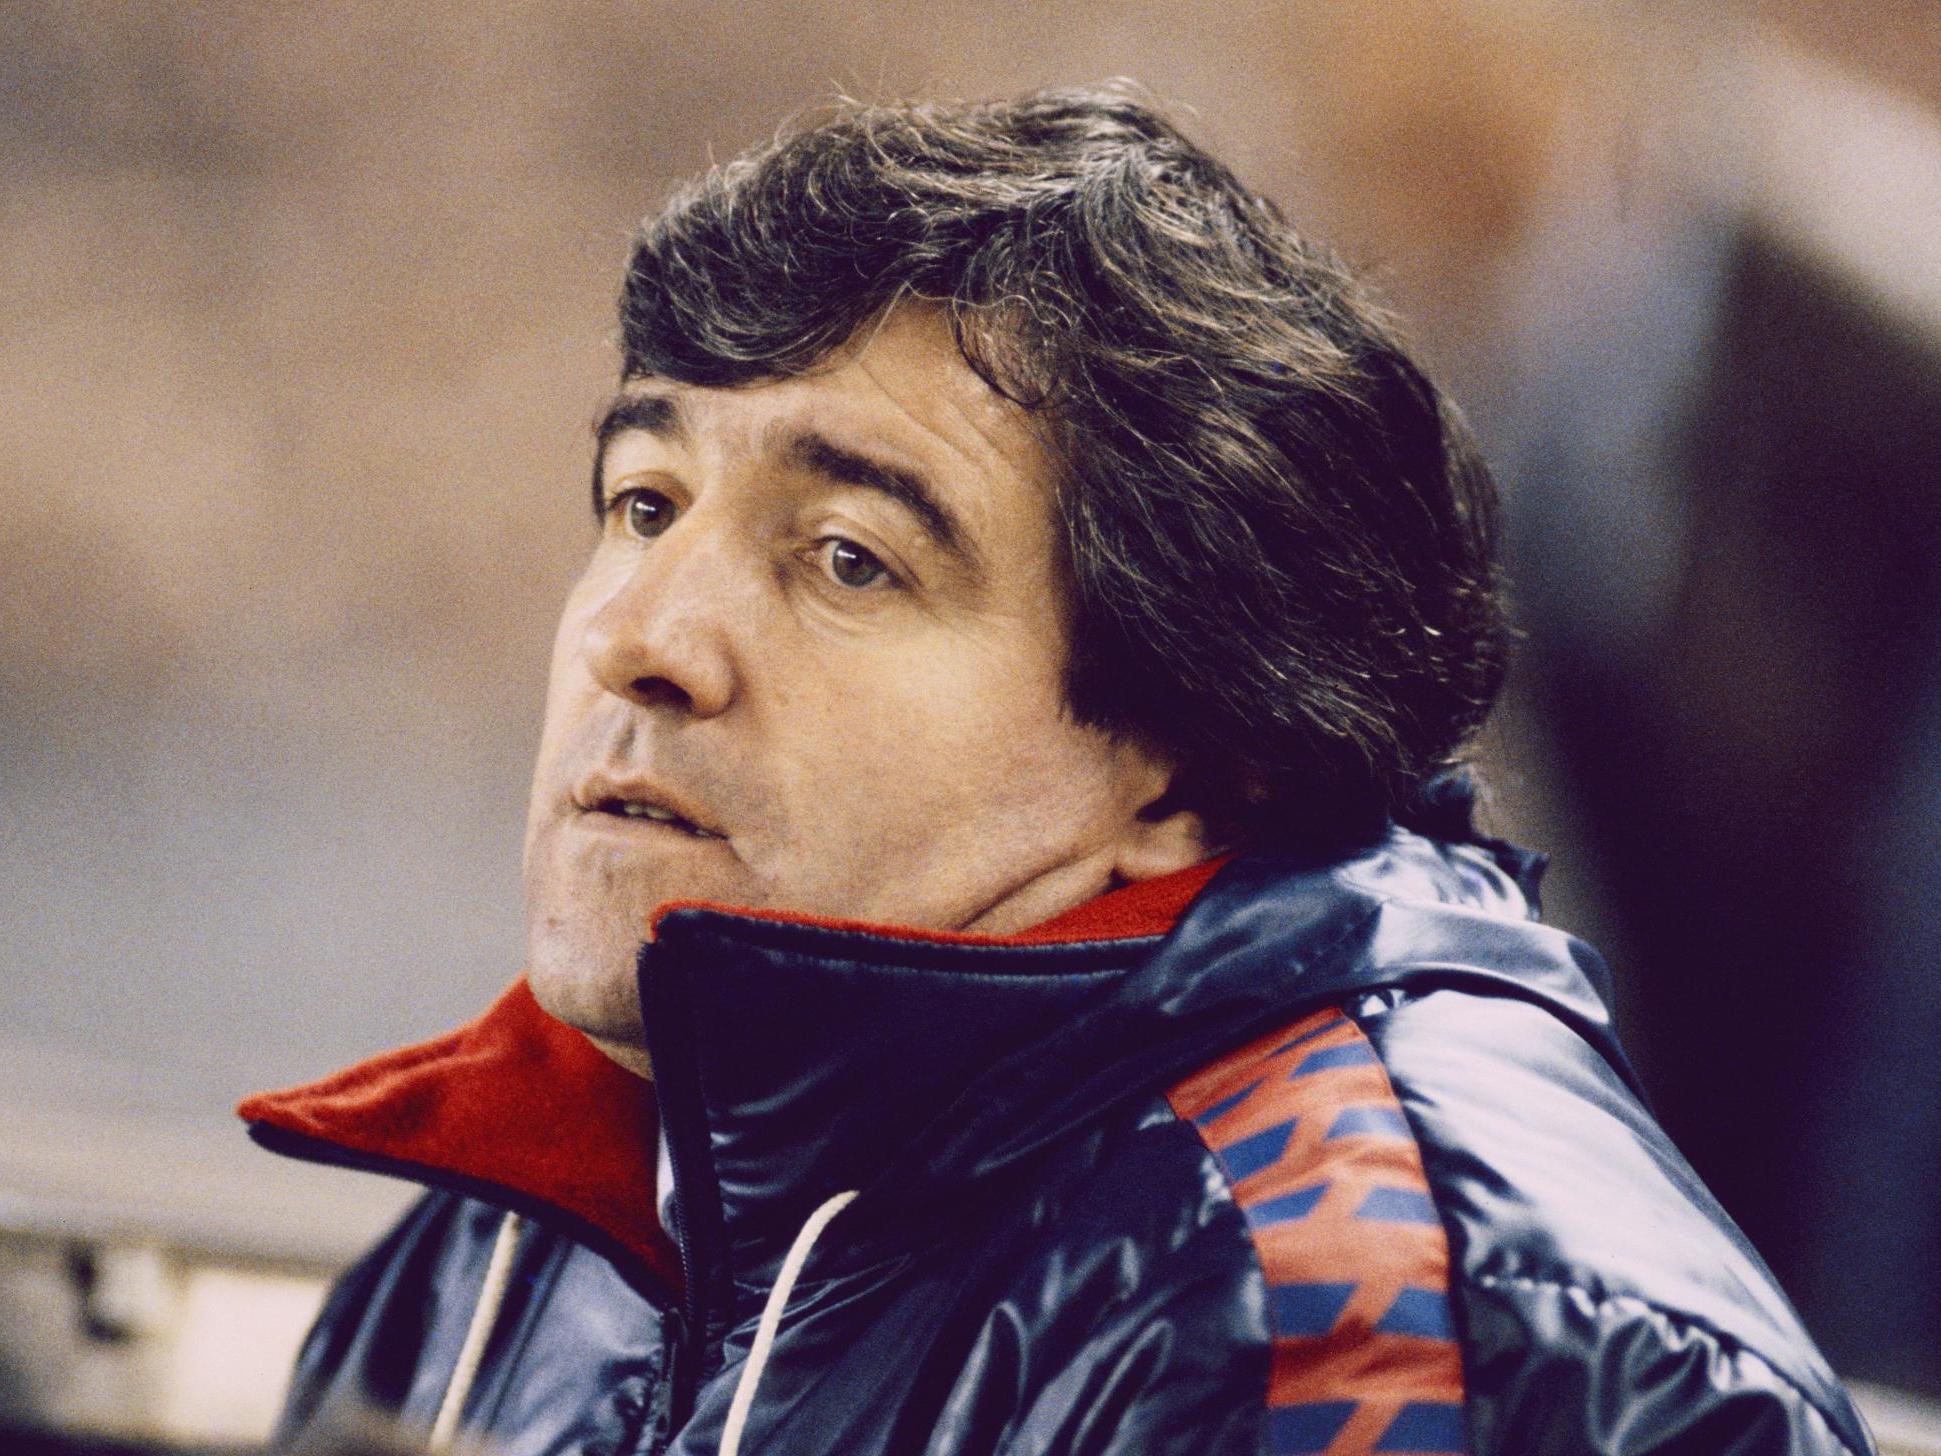 Terry Venables led Barcelona to a first league title in 11 years in 1985